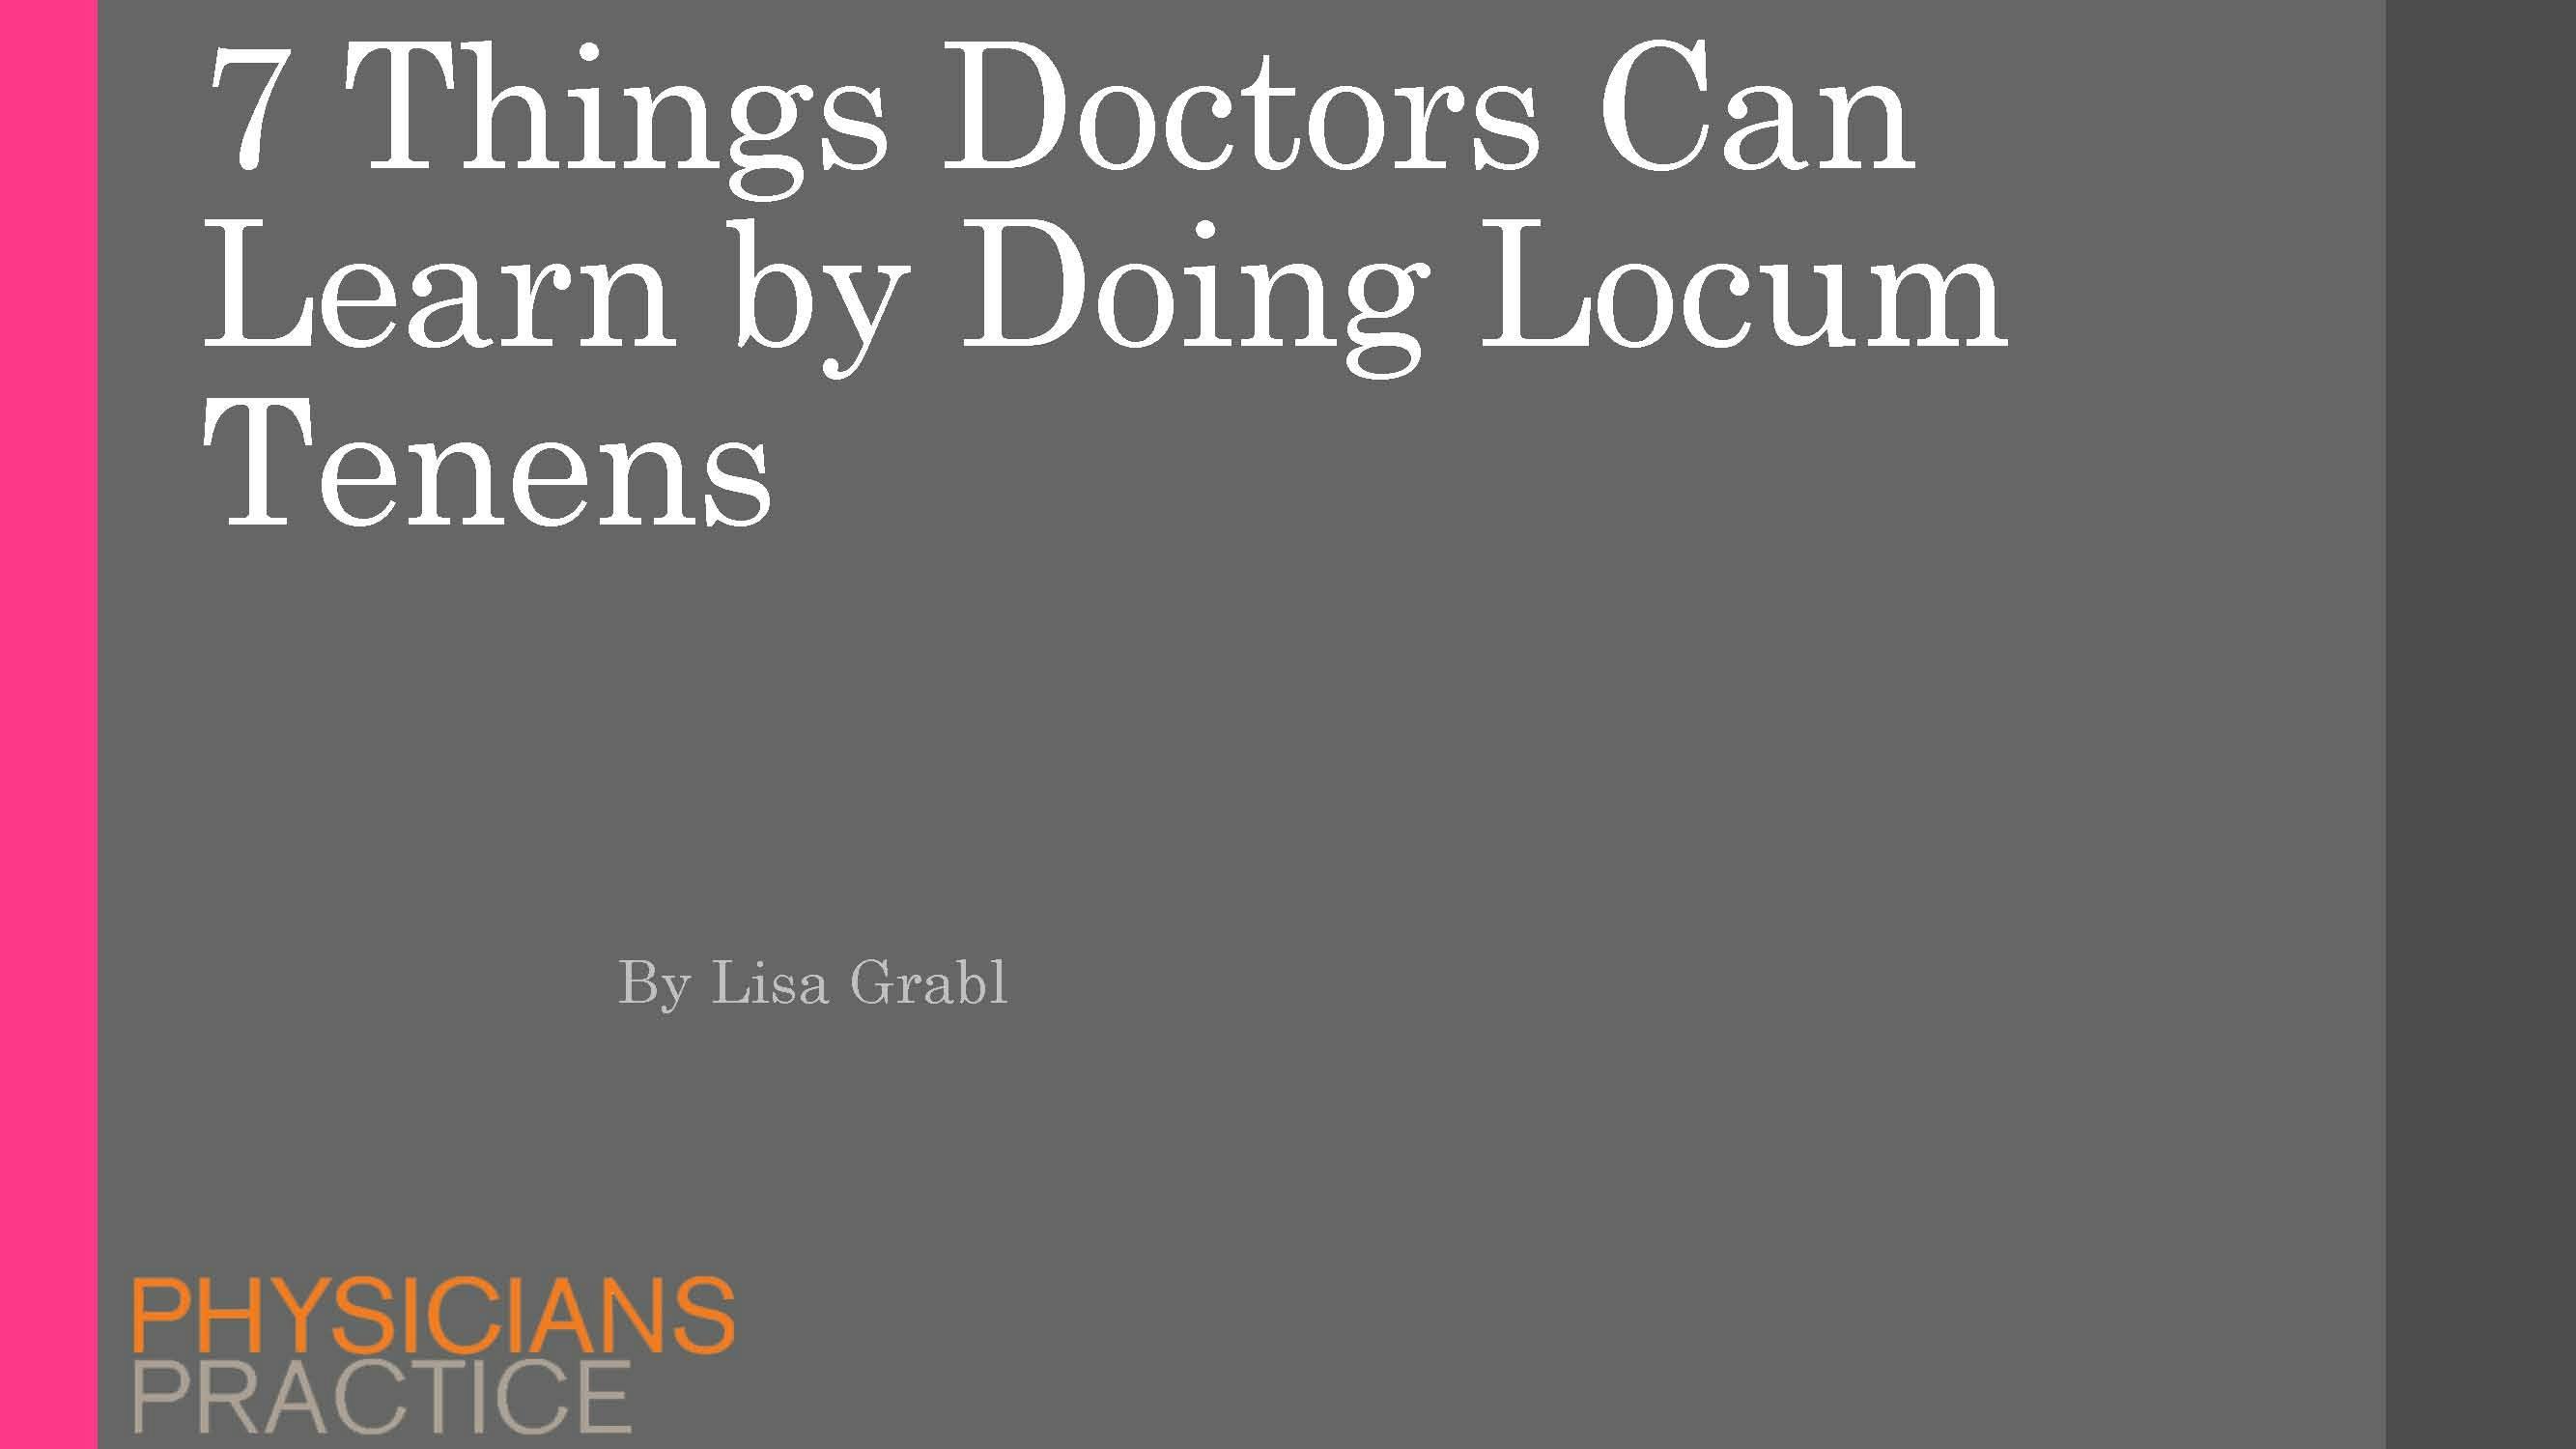 7 Things Doctors Can Learn From Doing Locum Tenens